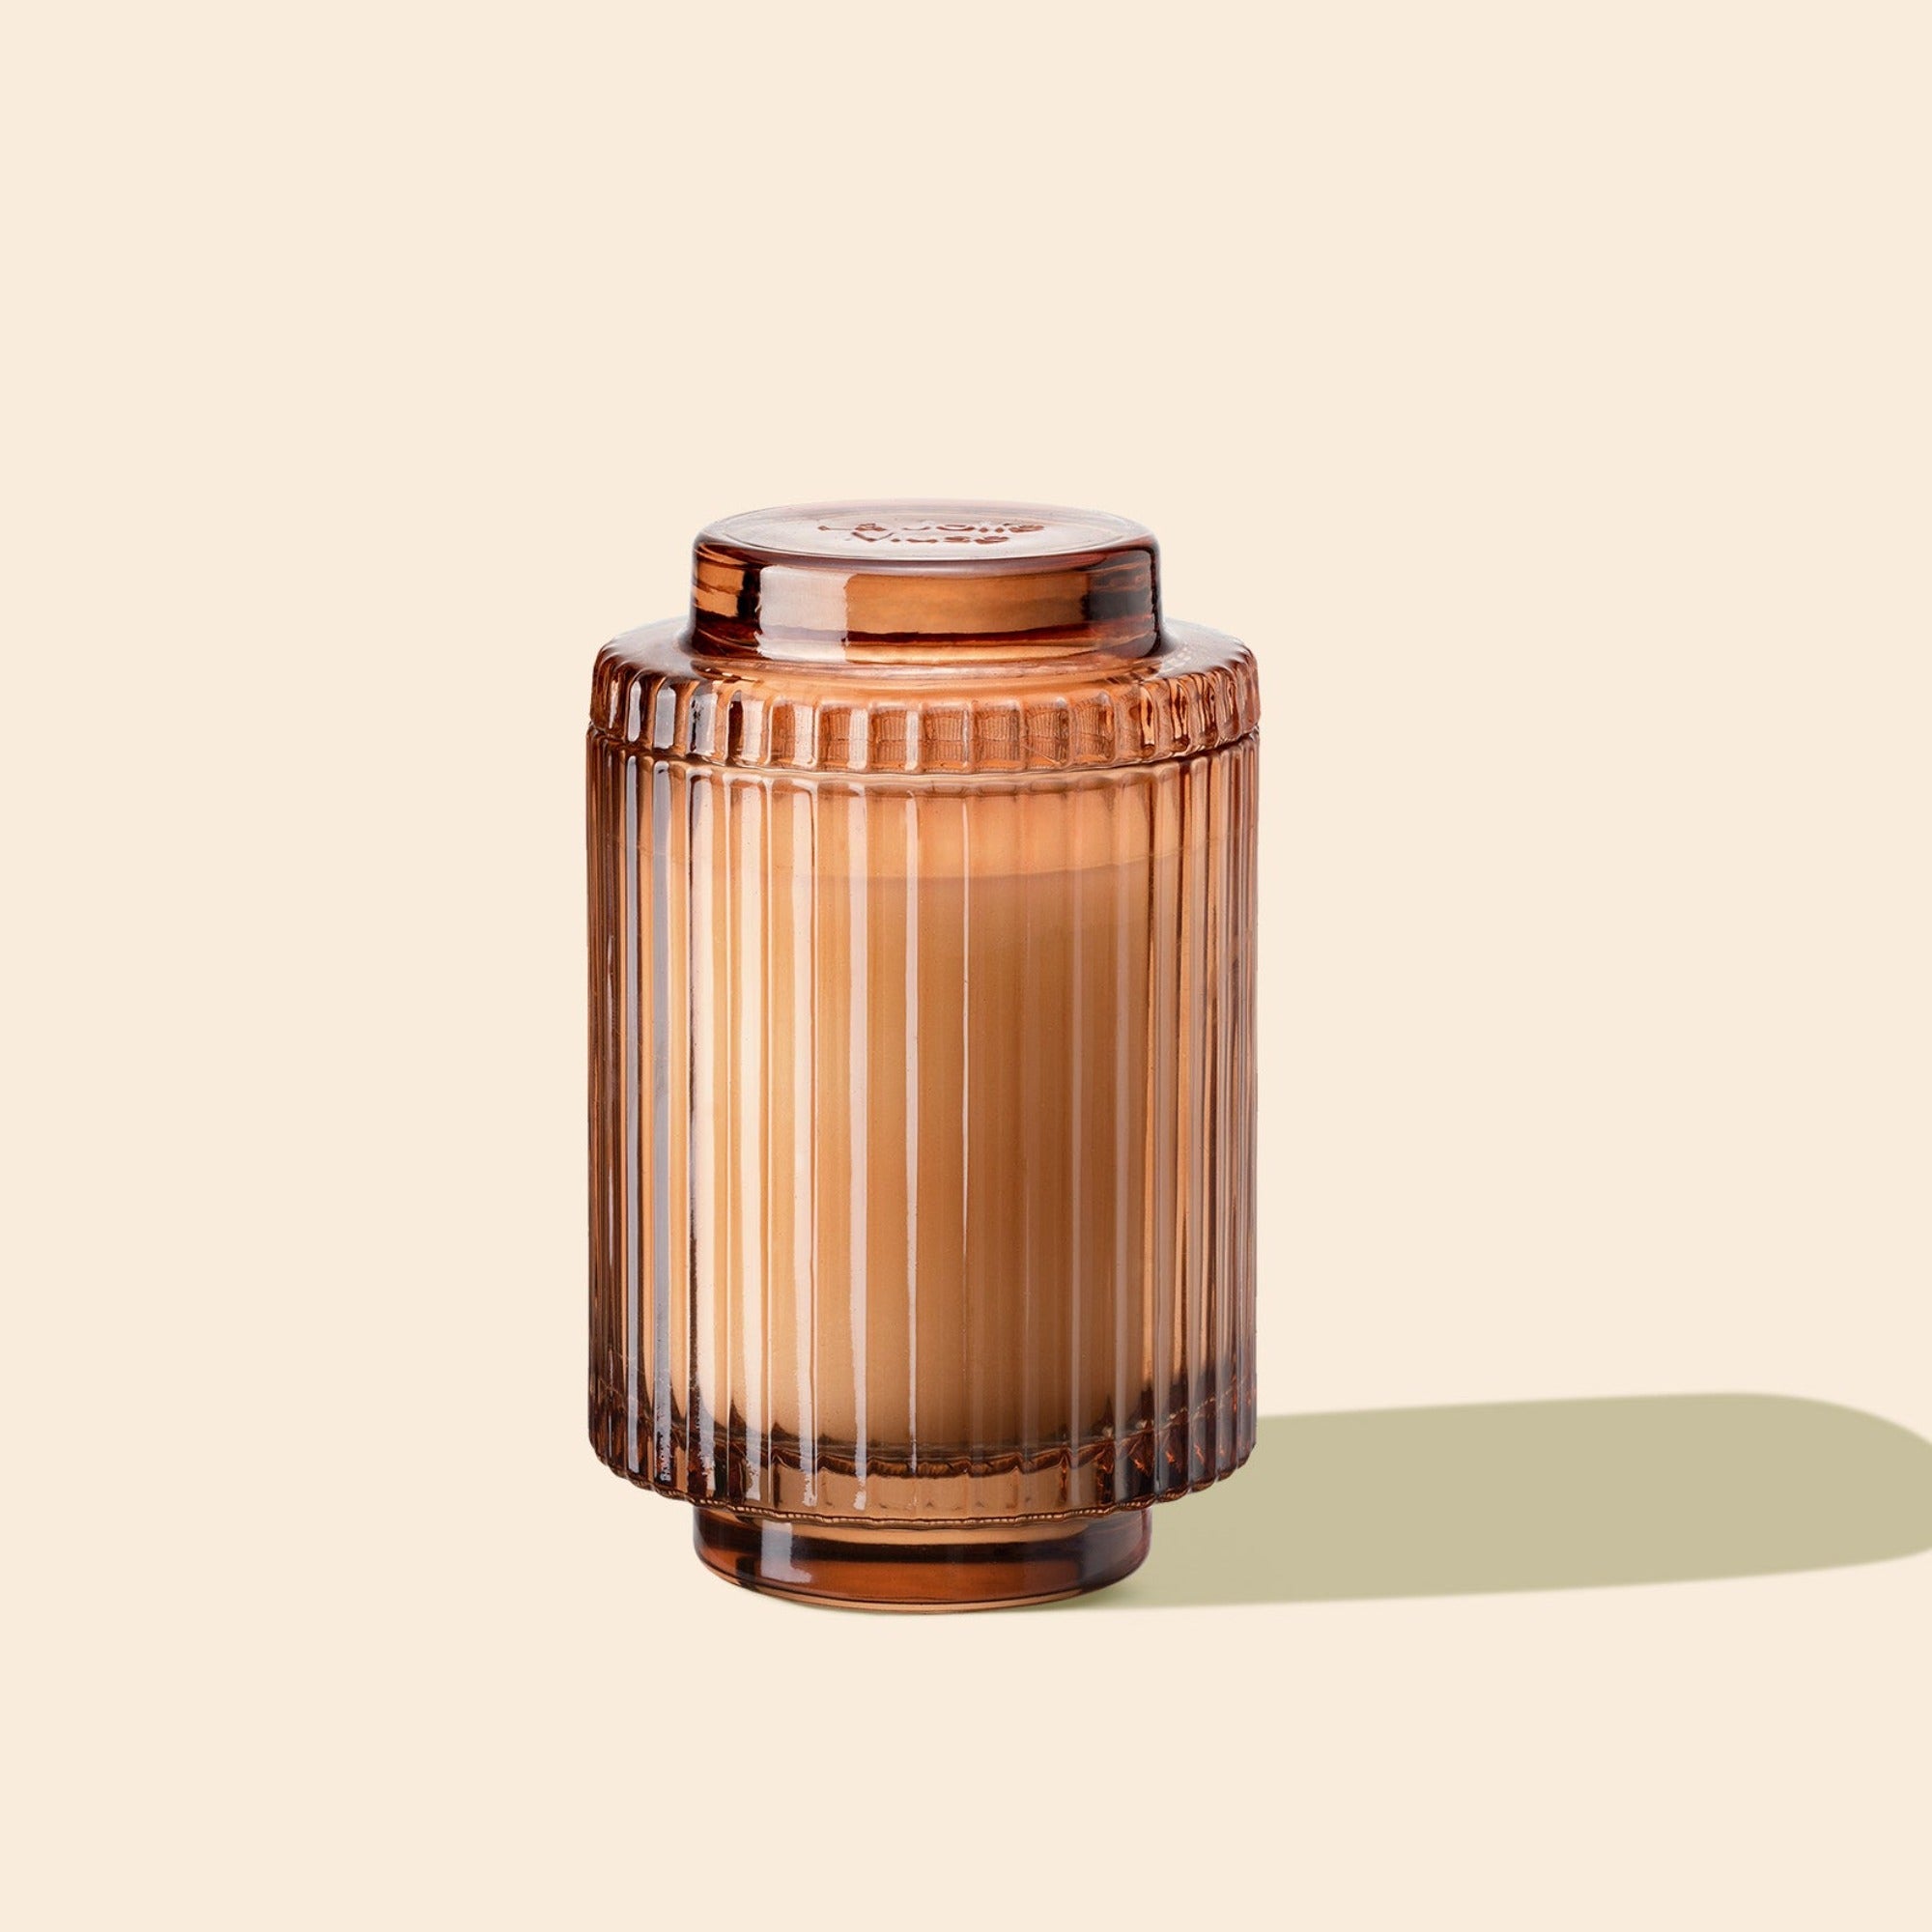 Product Shot of Amélie - Sylvan Figue 7oz candle in the middle